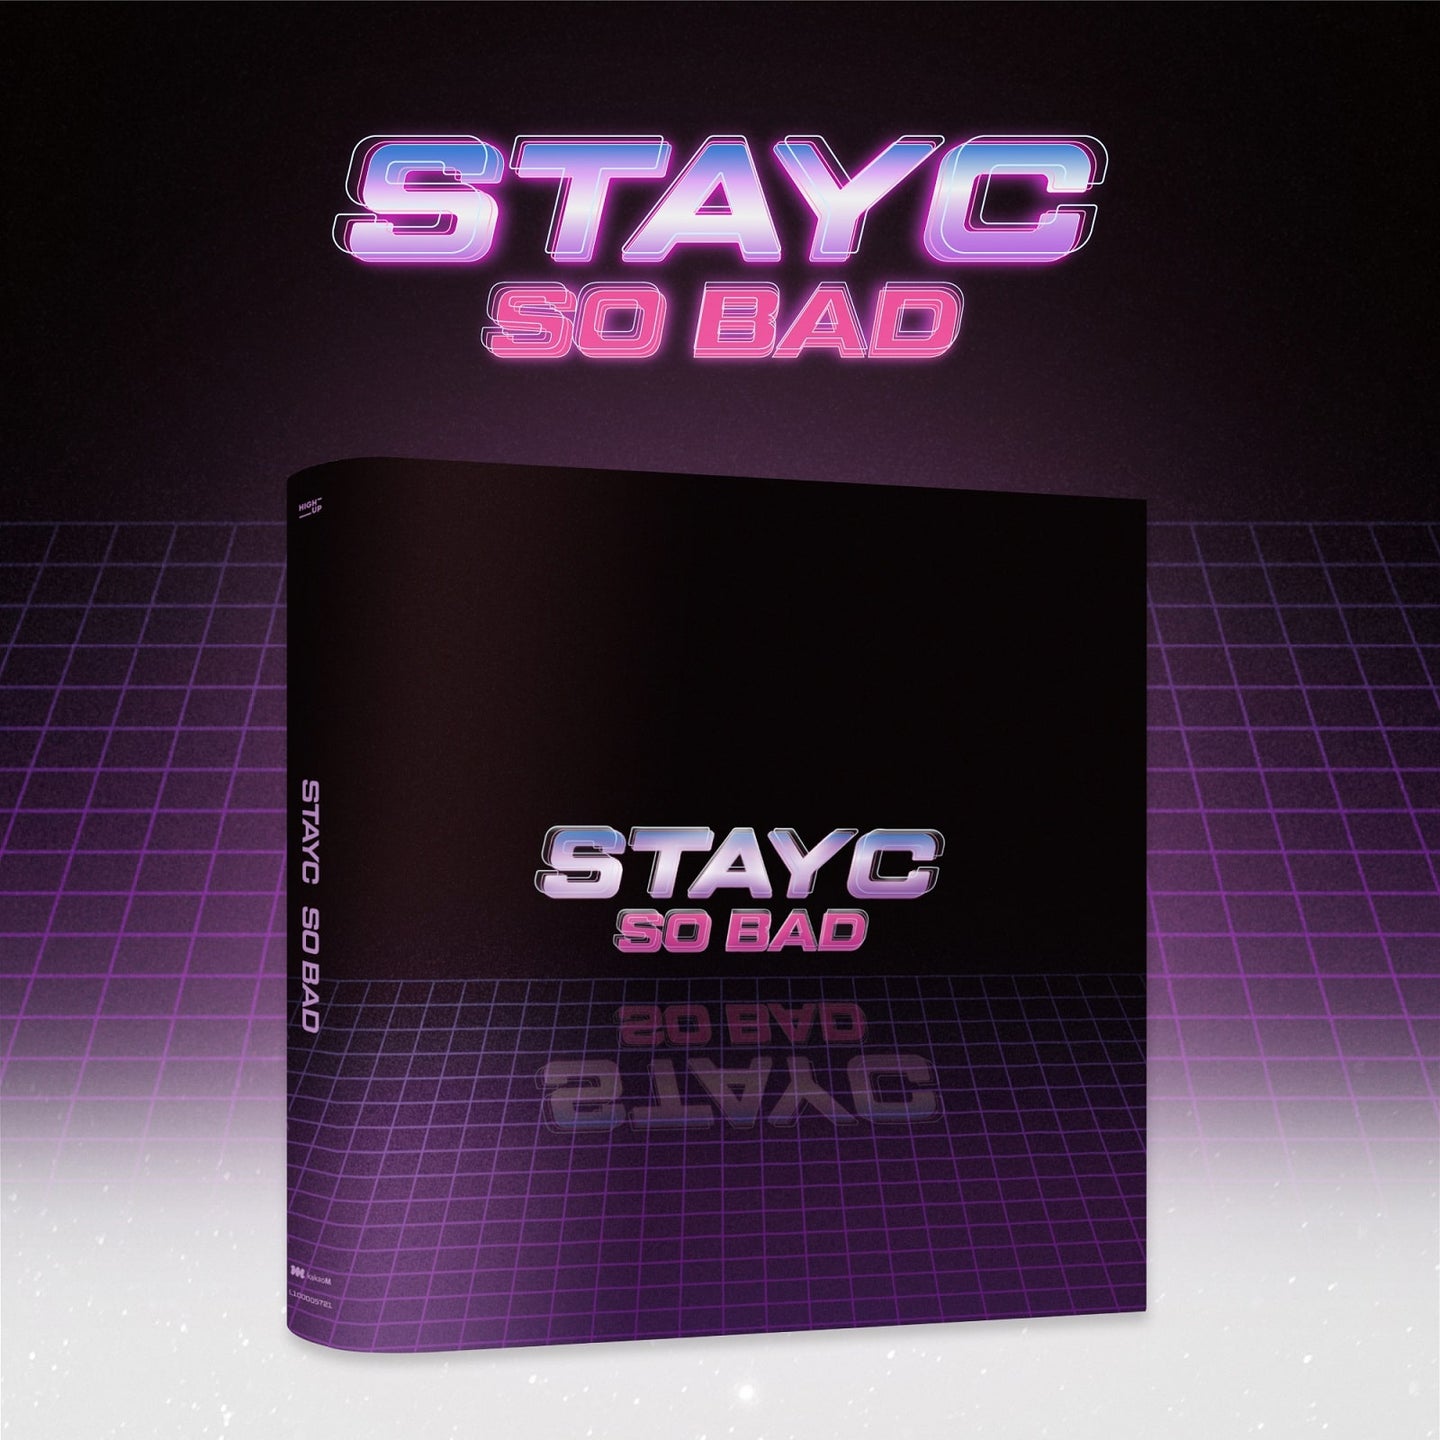 STAYC Single Album Vol. 1 - Star To A Young Culture [So Bad]